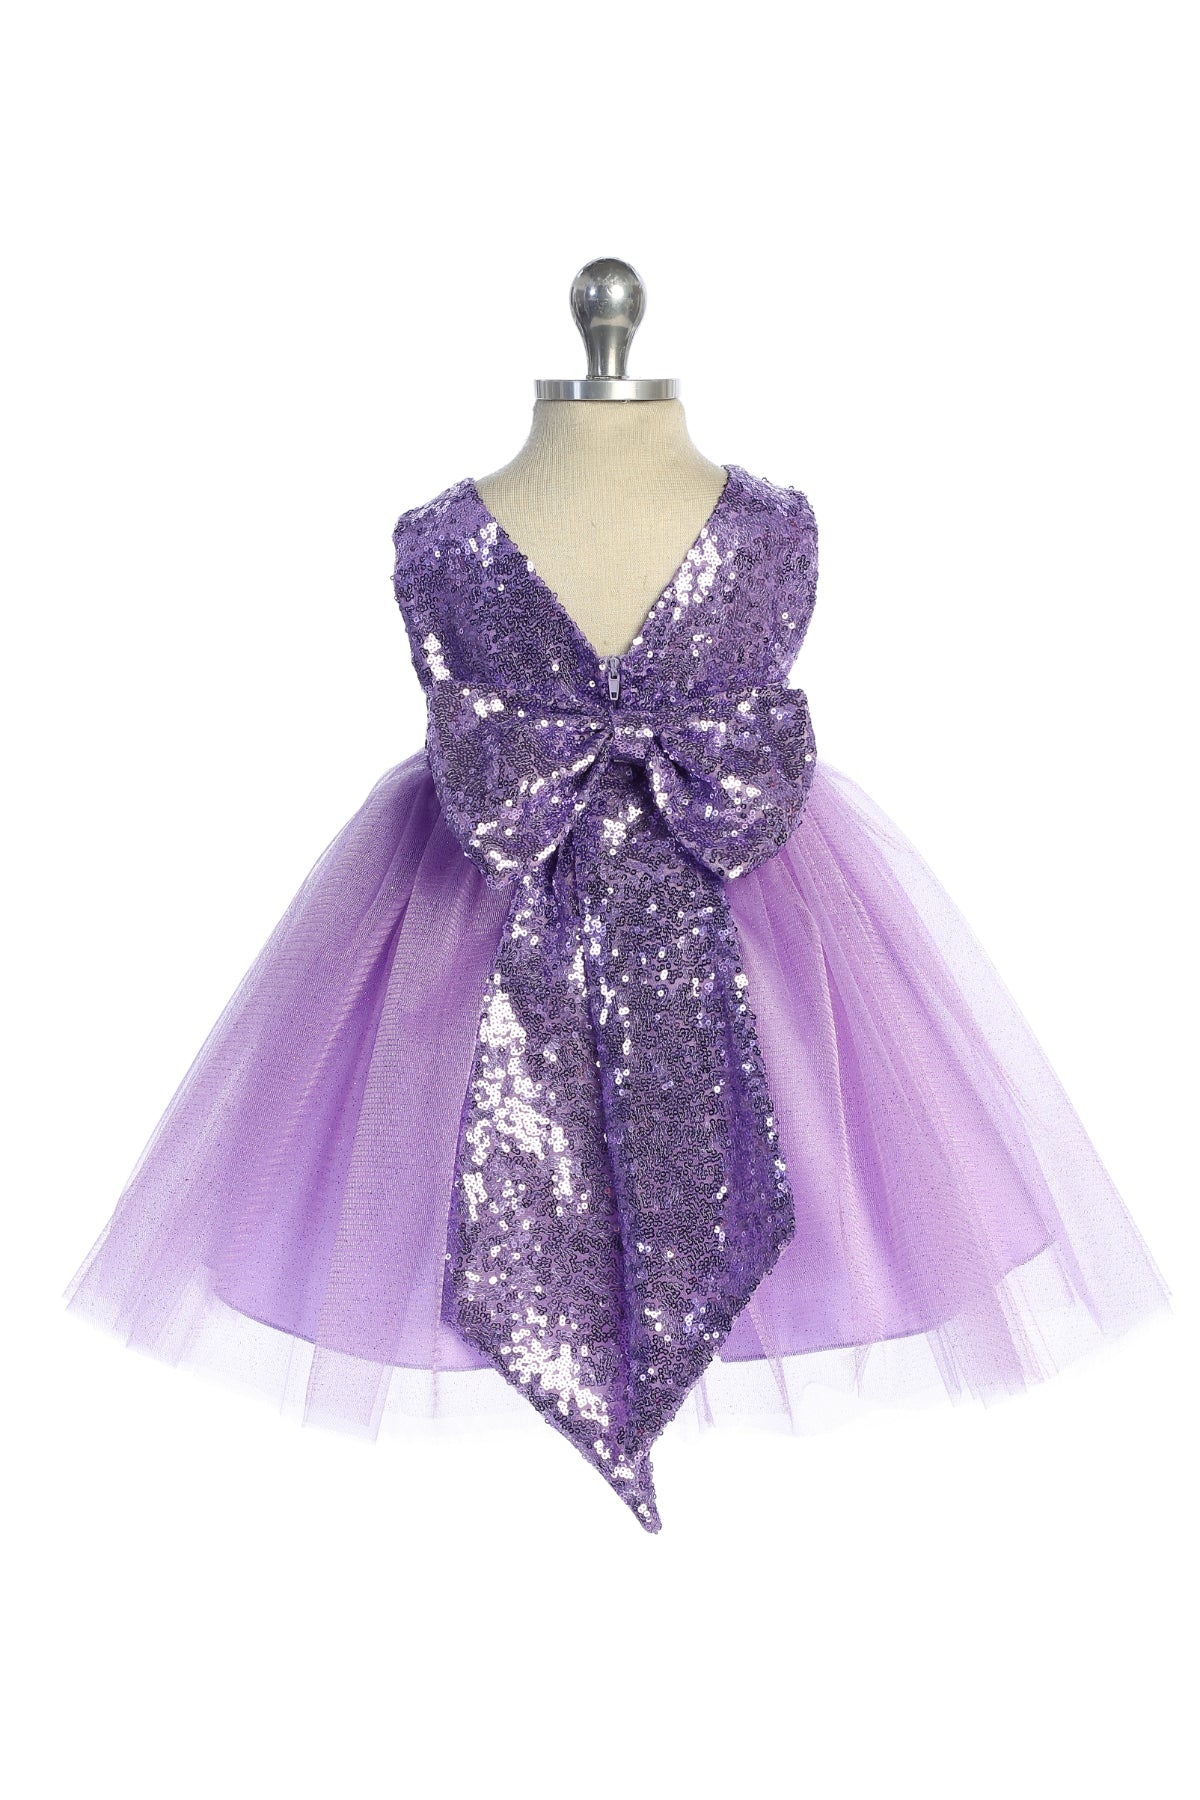 498B Matching Sequins V Back & Bow Baby Dress